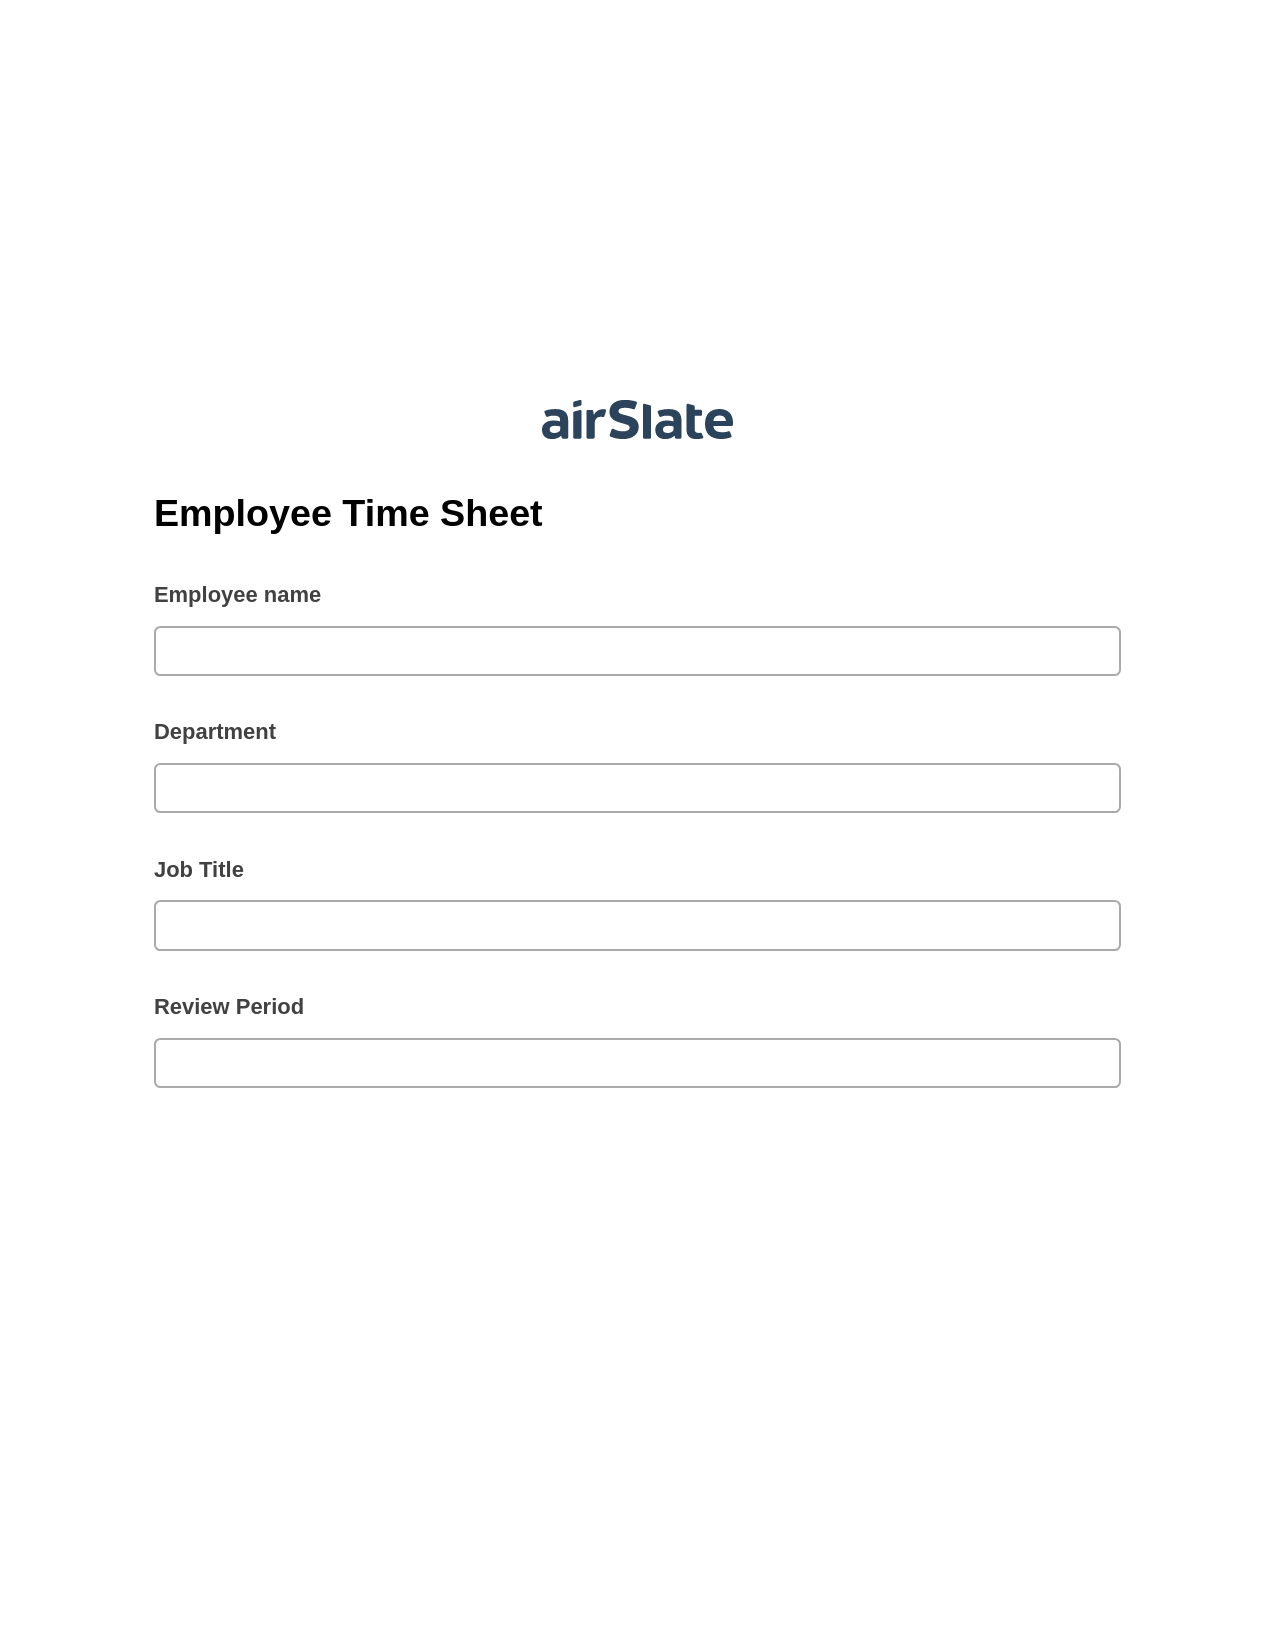 Multirole Employee Time Sheet Pre-fill Dropdowns from Smartsheet Bot, Create slate addon, Export to Excel 365 Bot